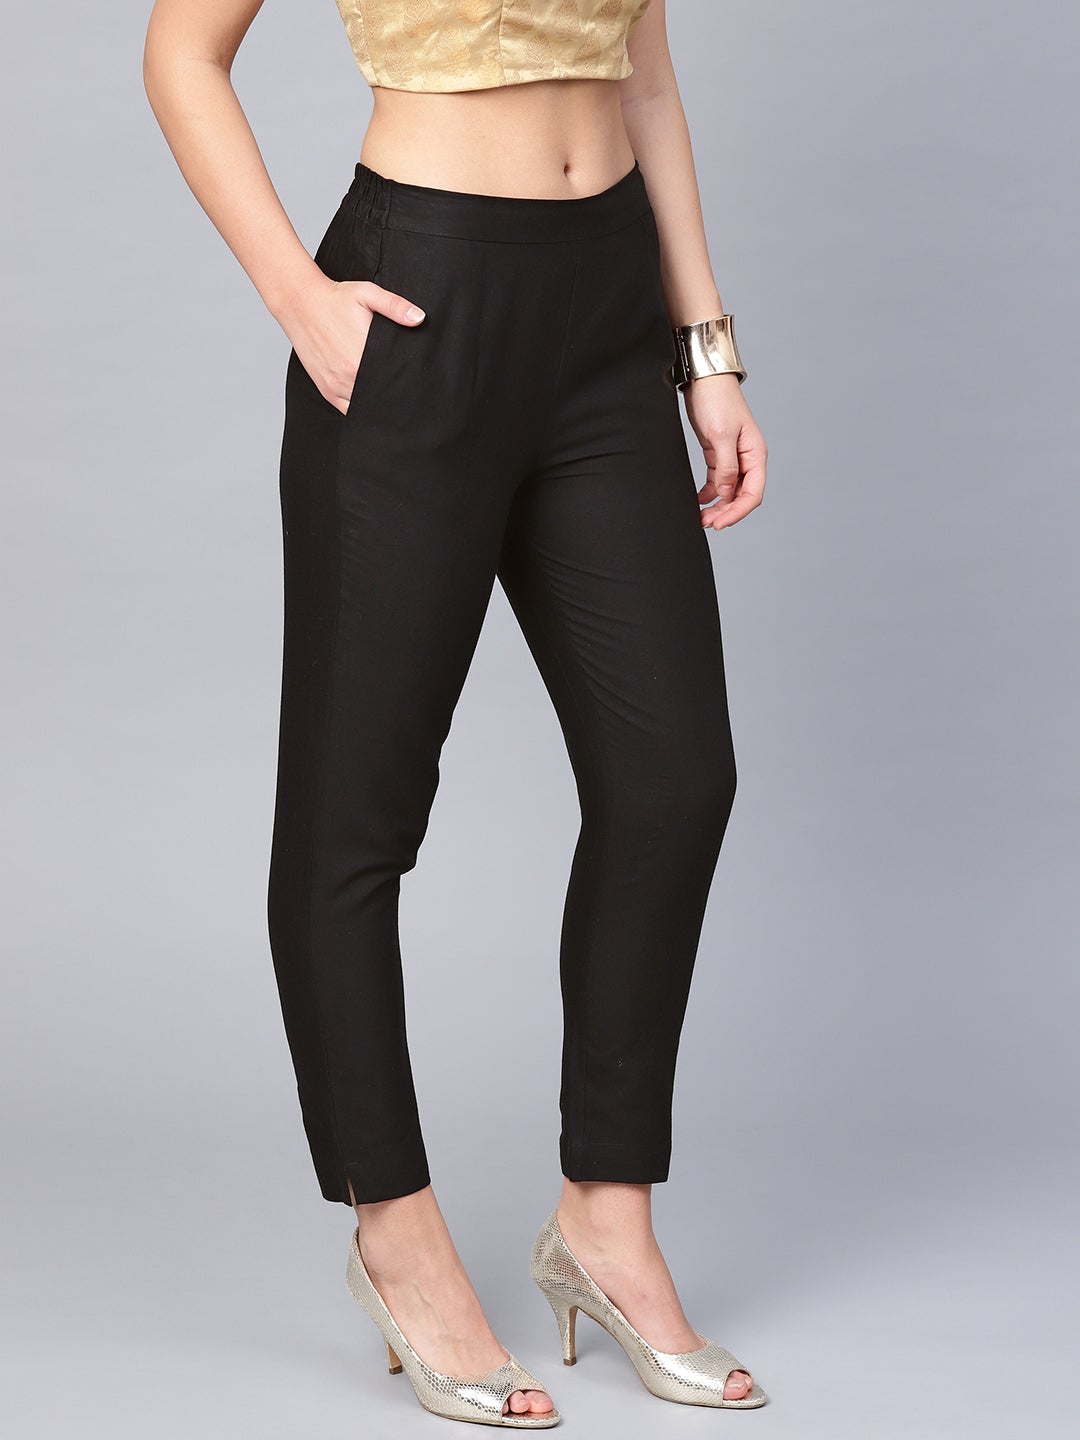 ASOS DESIGN Tall stretch faux leather cigarette pant in black | ASOS